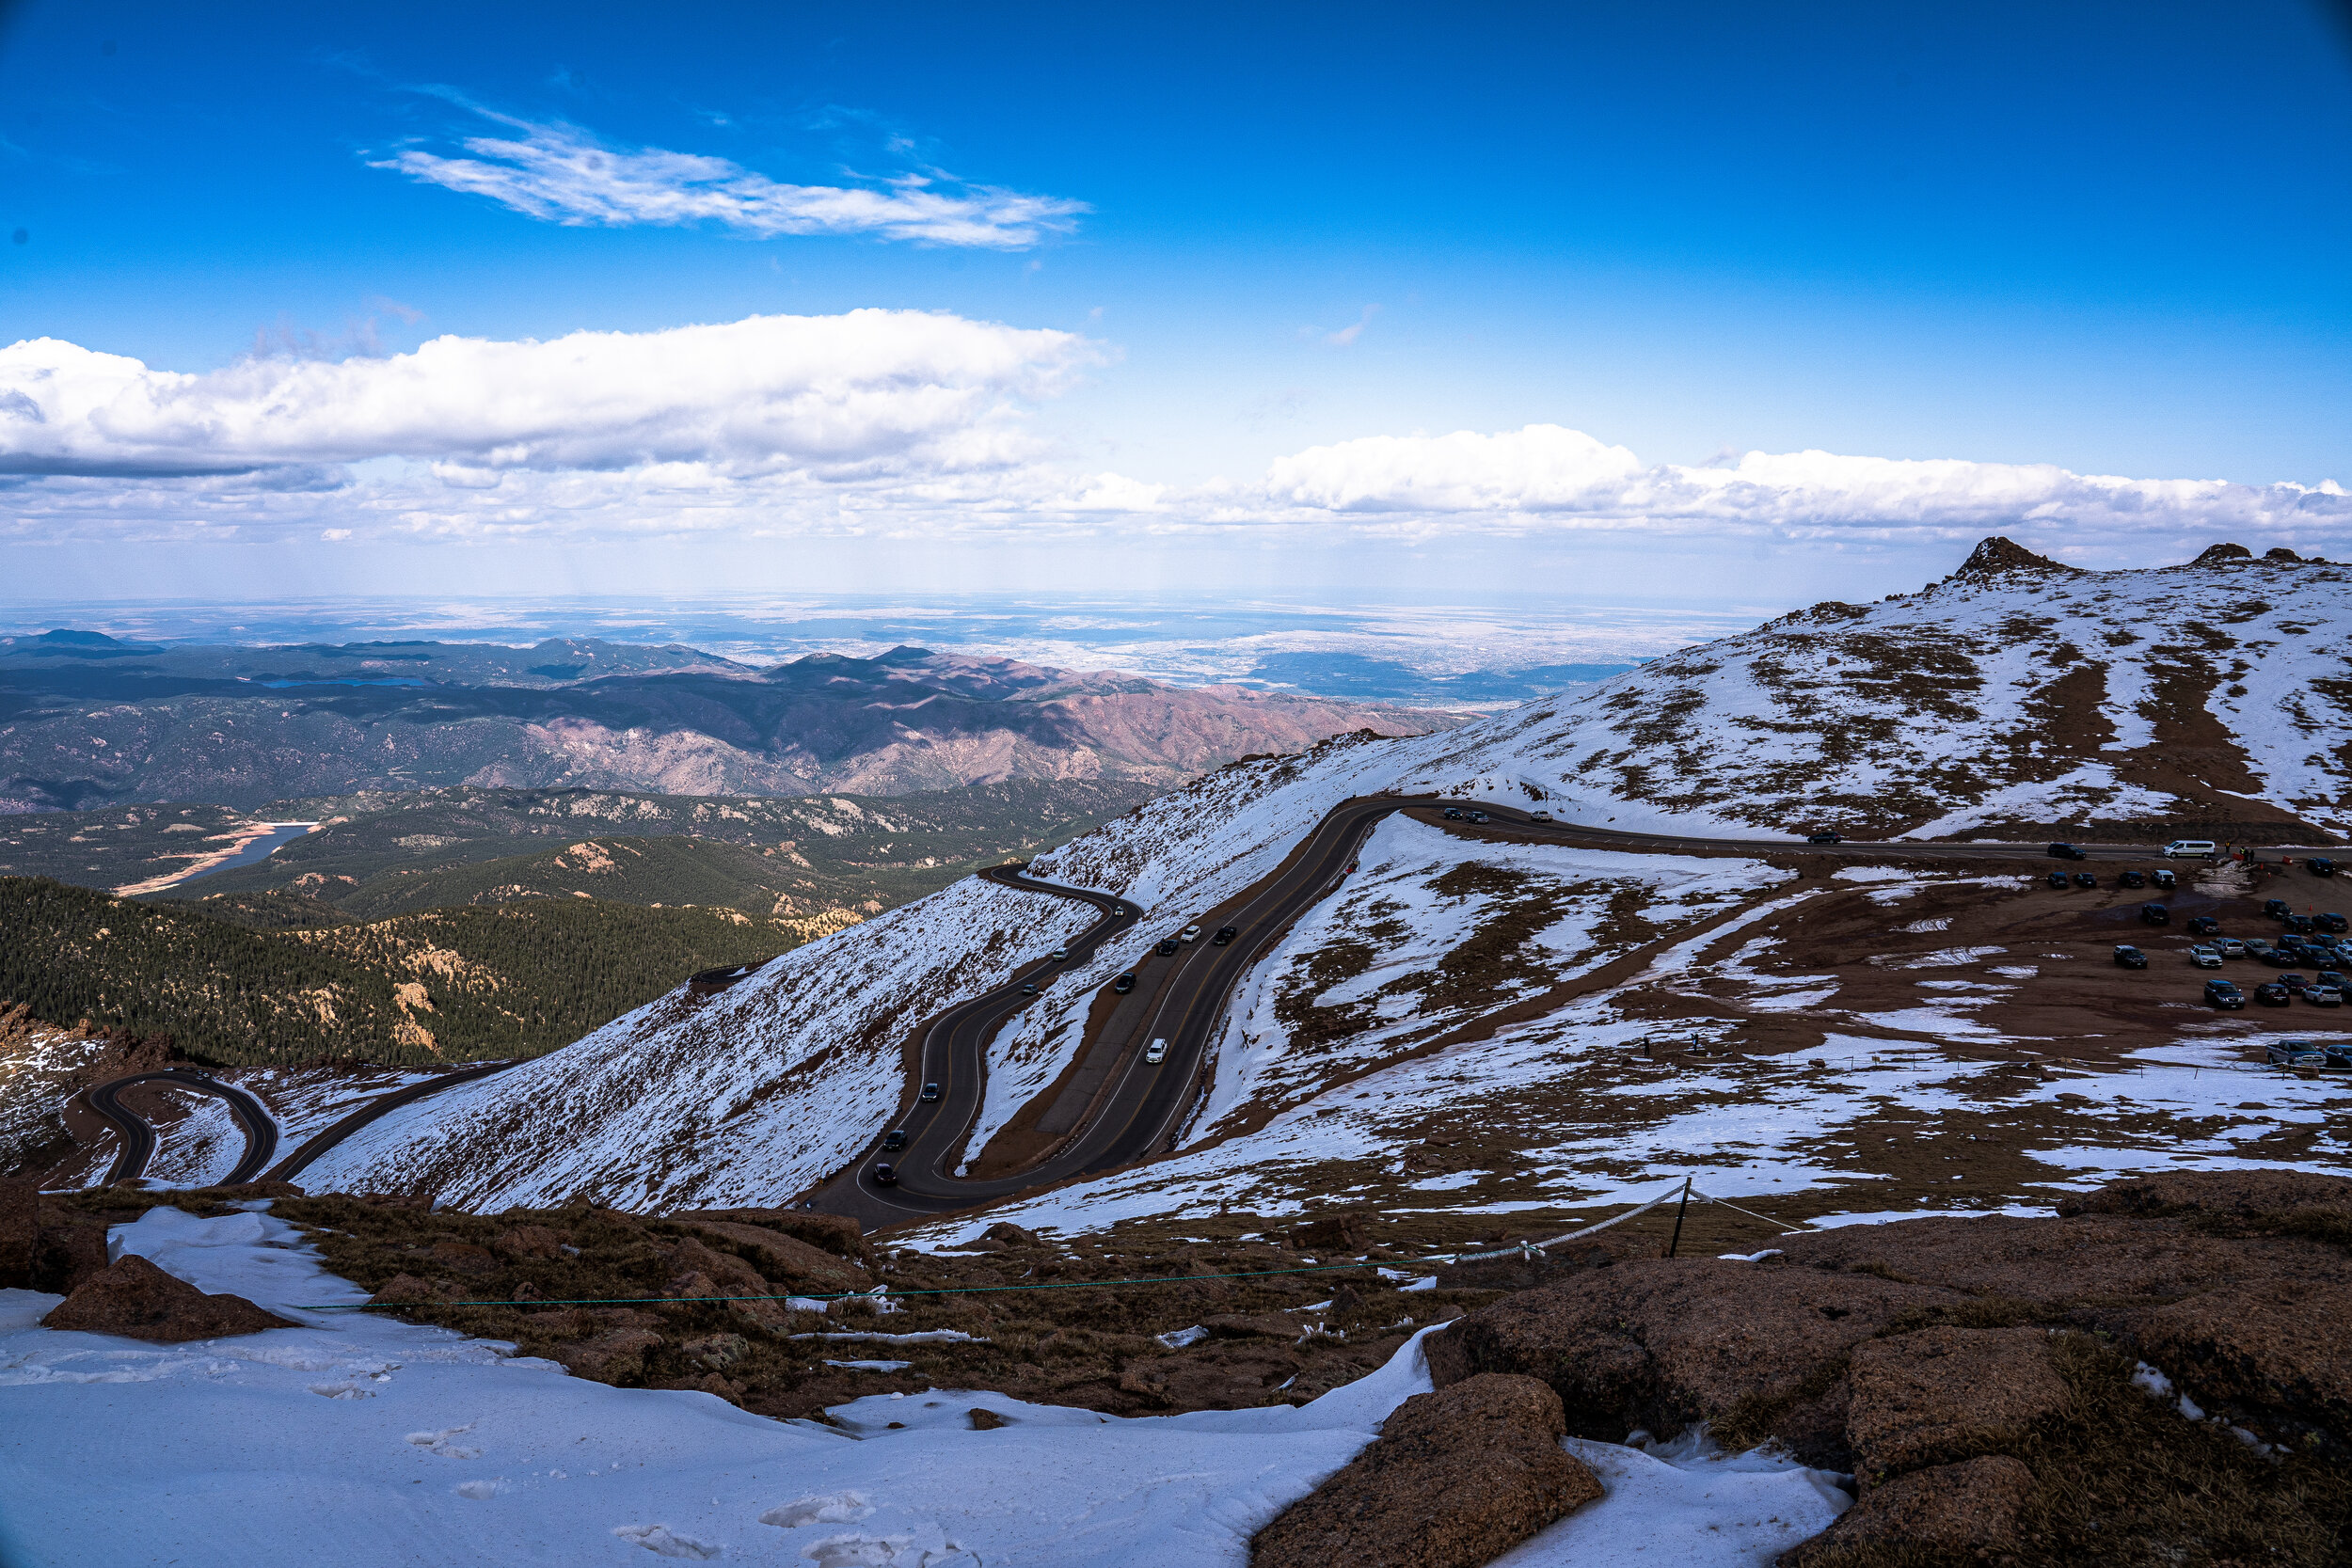   Pikes Peak  in Colorado Springs is famous because it’s one of the more accessible “14-ers,” (14,115-foot elevation) in Colorado due to its location, and because it can be reached by car along the 19-mile paved highway.  